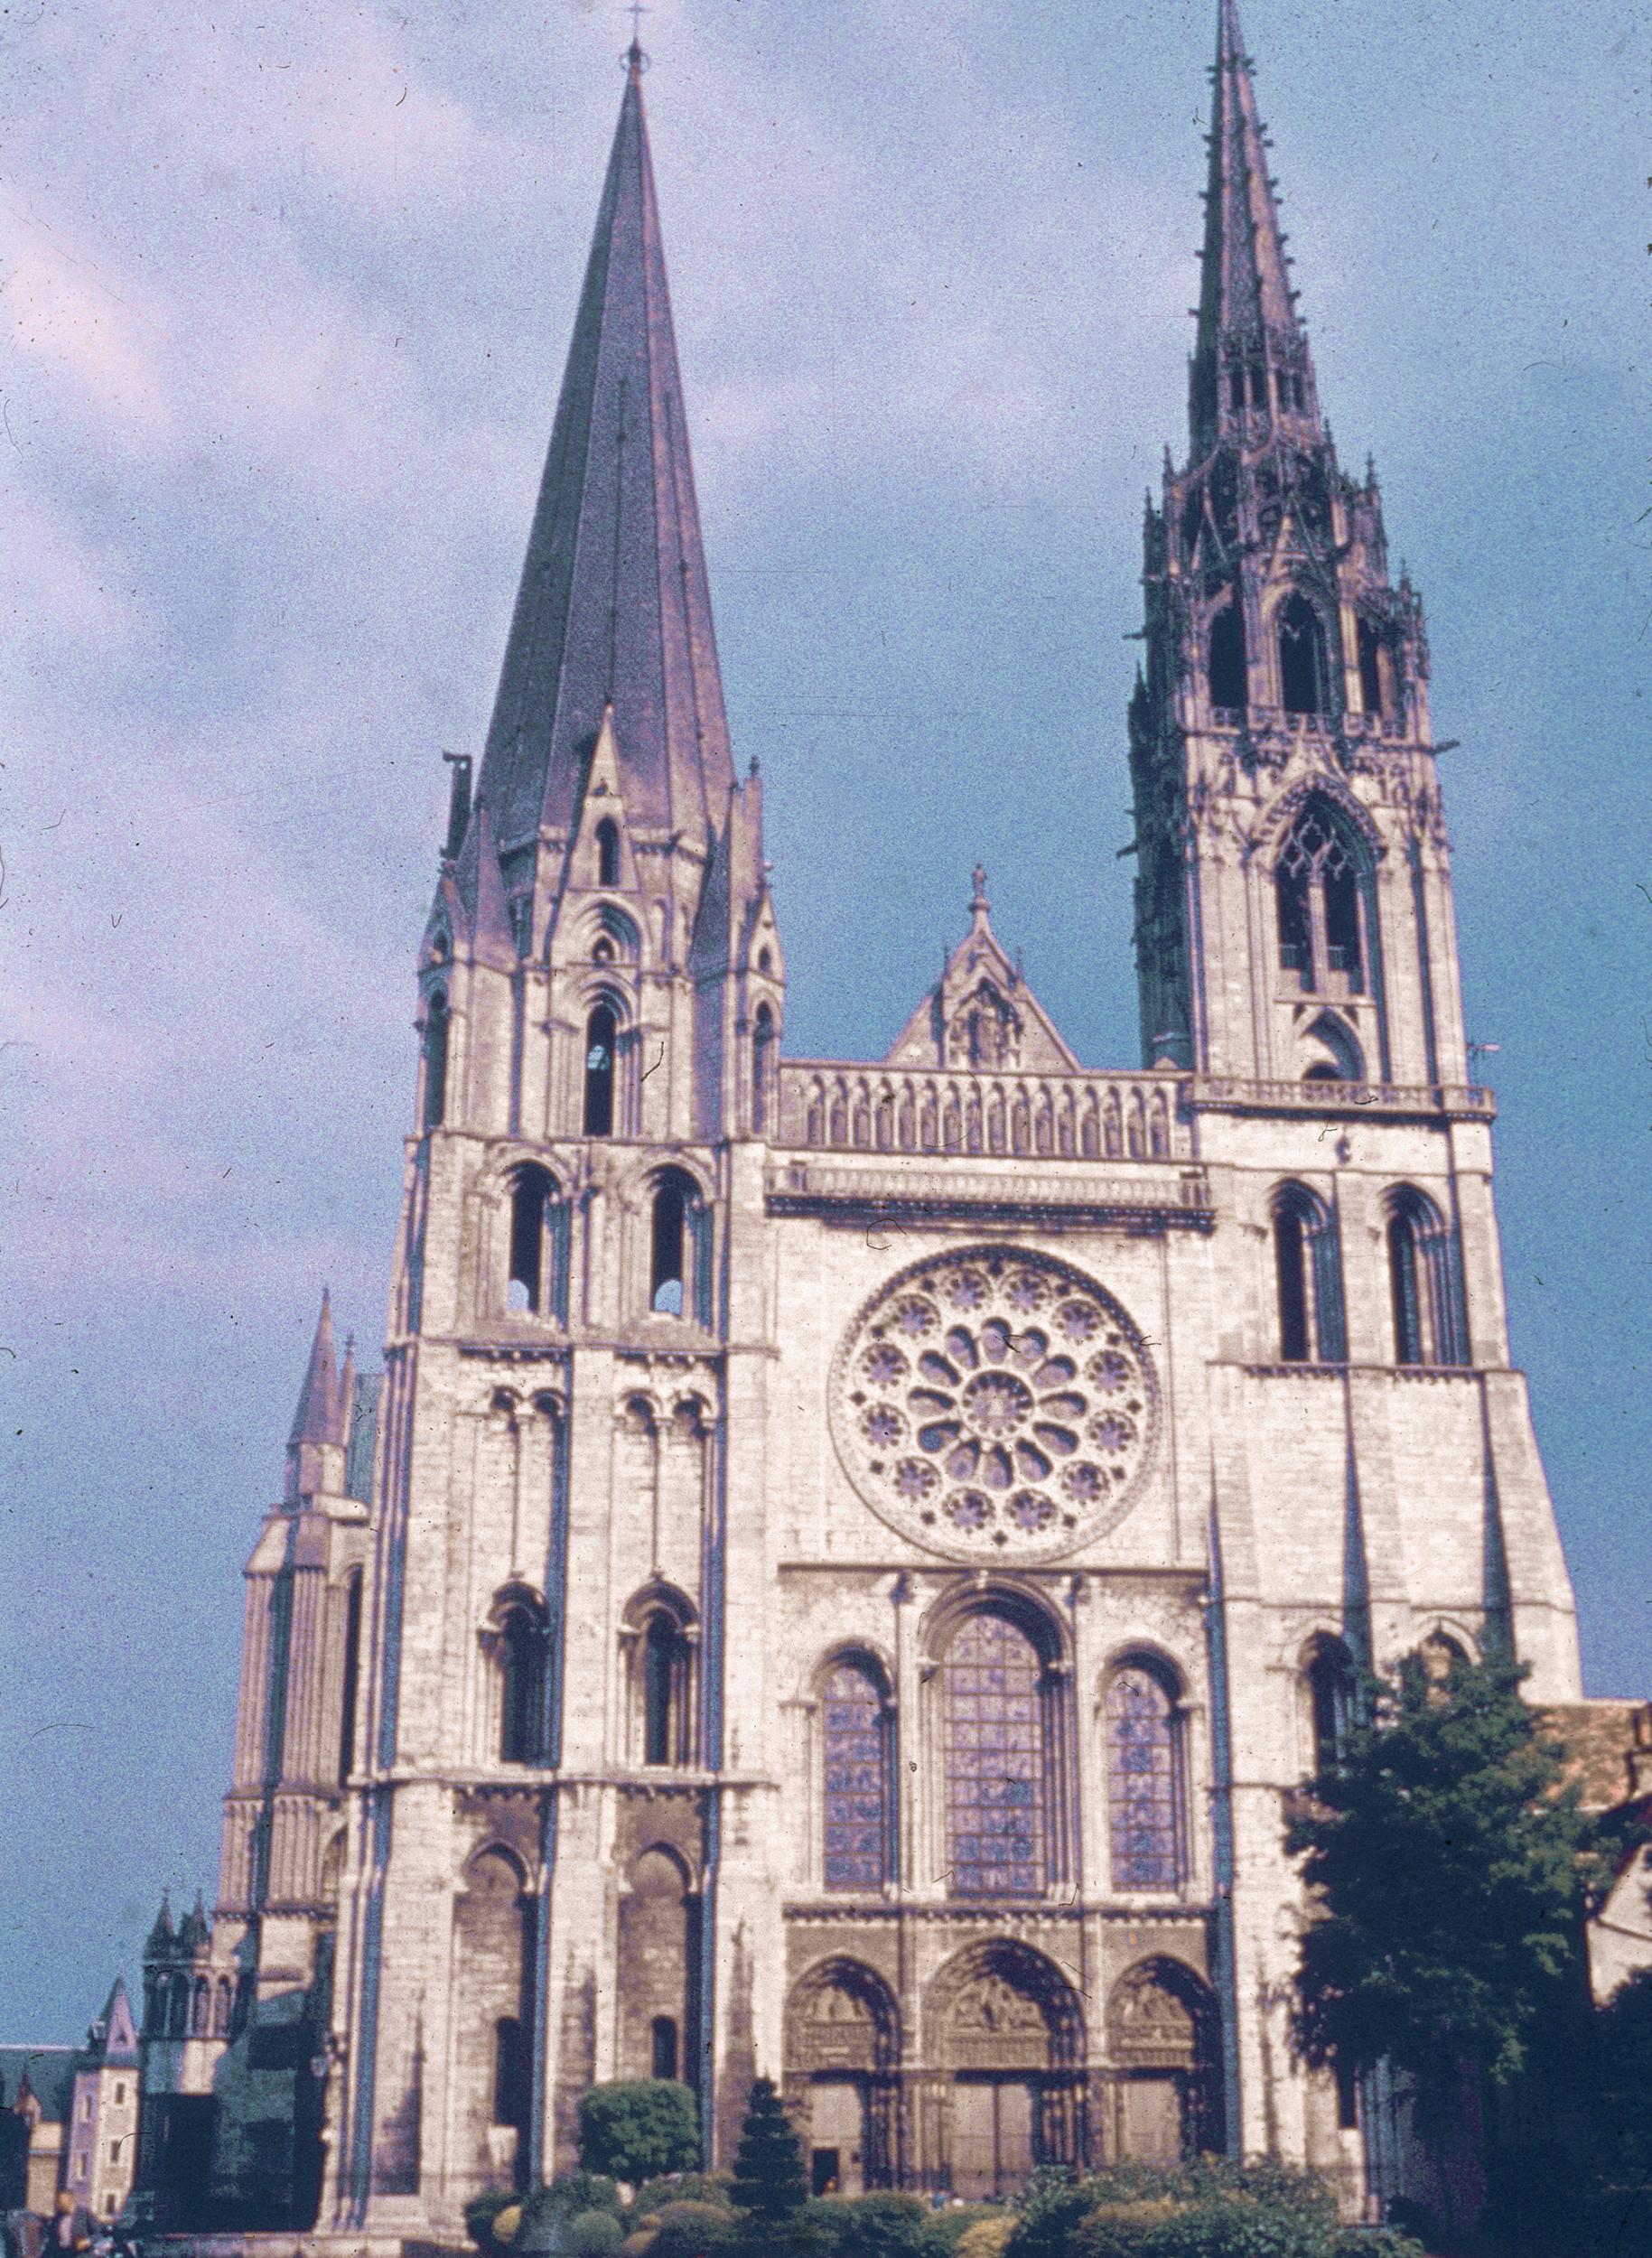 Chartres as it looked in the 1960s